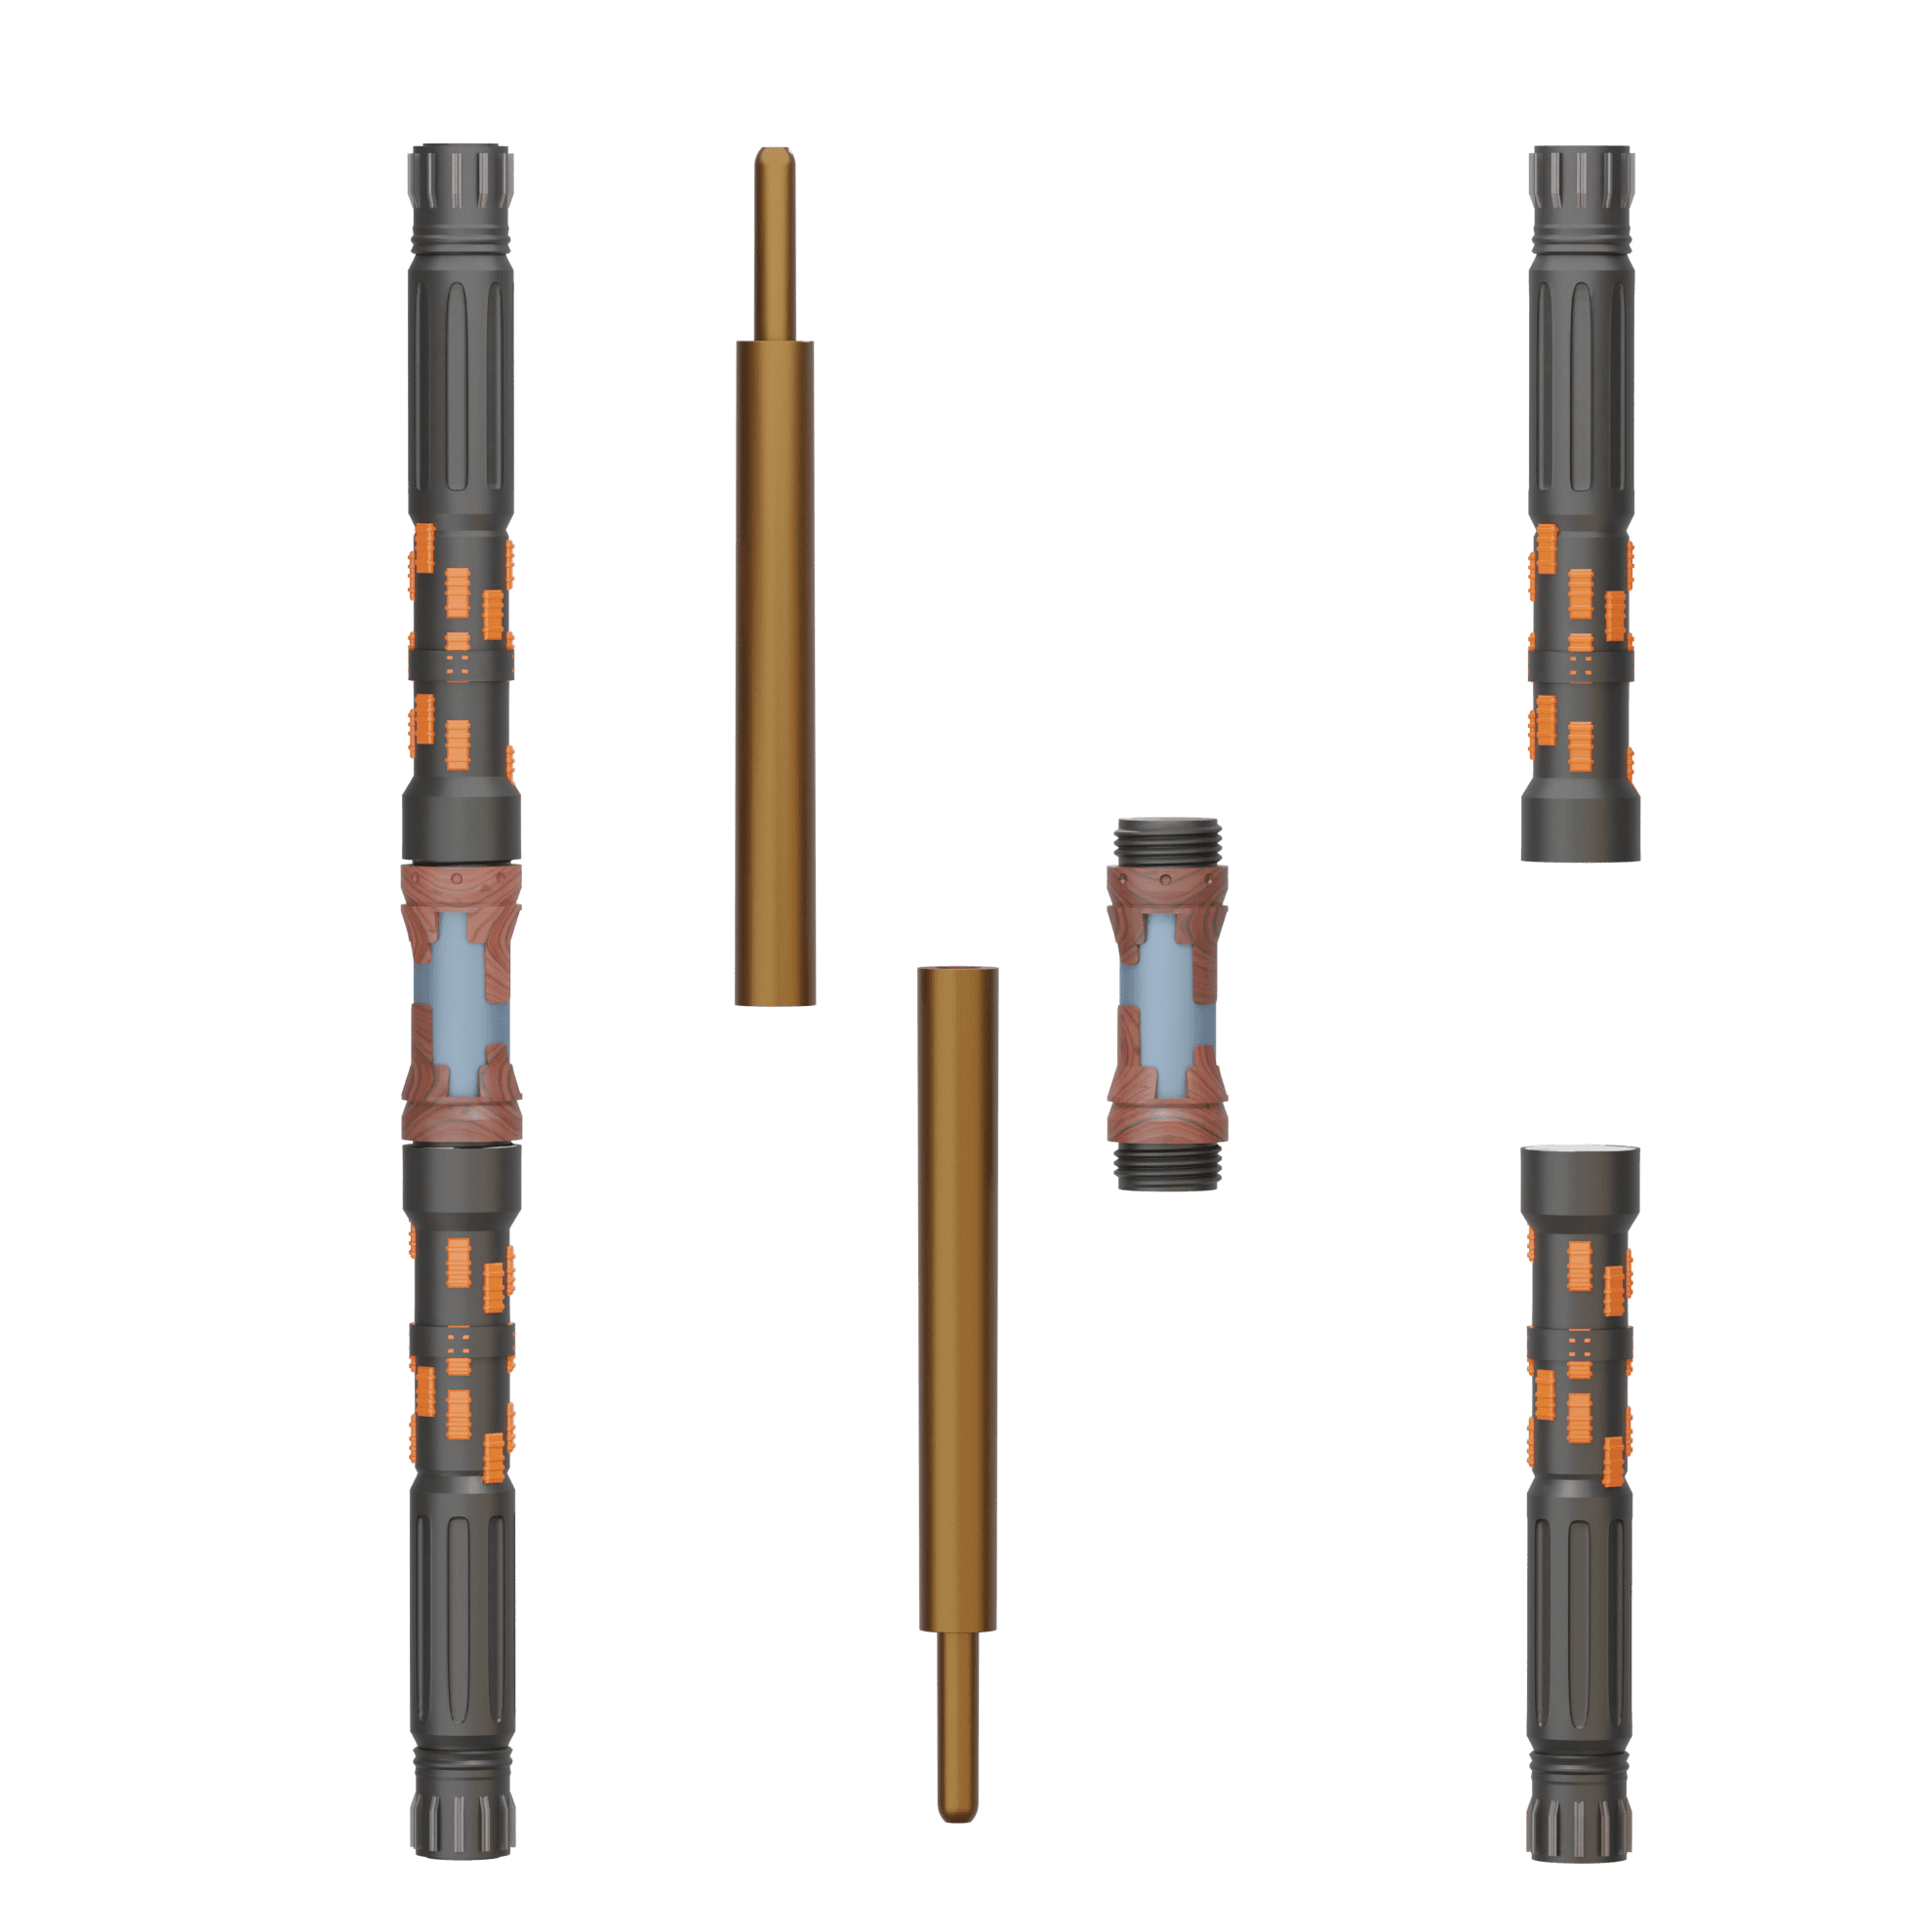 Print in Place Collapsing Double Lightsaber Concept 5 3d model